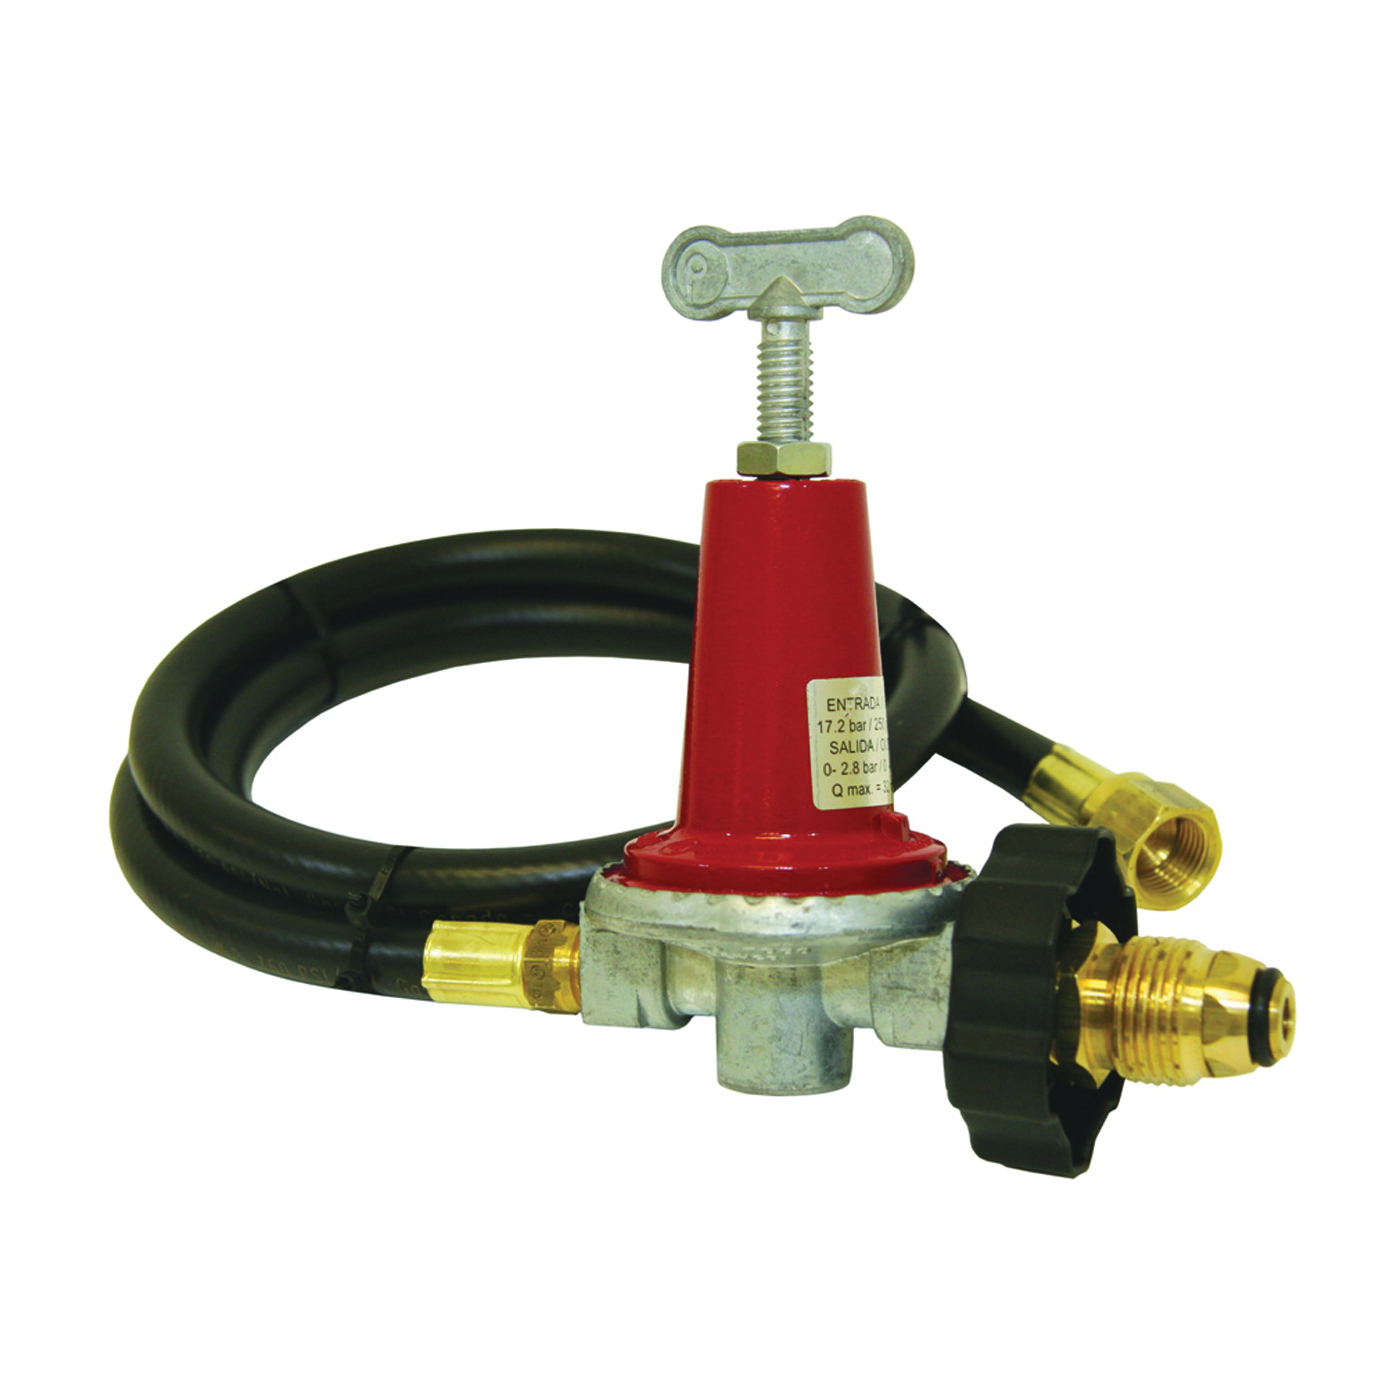 5HPR-40 Regulator and LPG Hose, 3/8 in Connection, 48 in L Hose